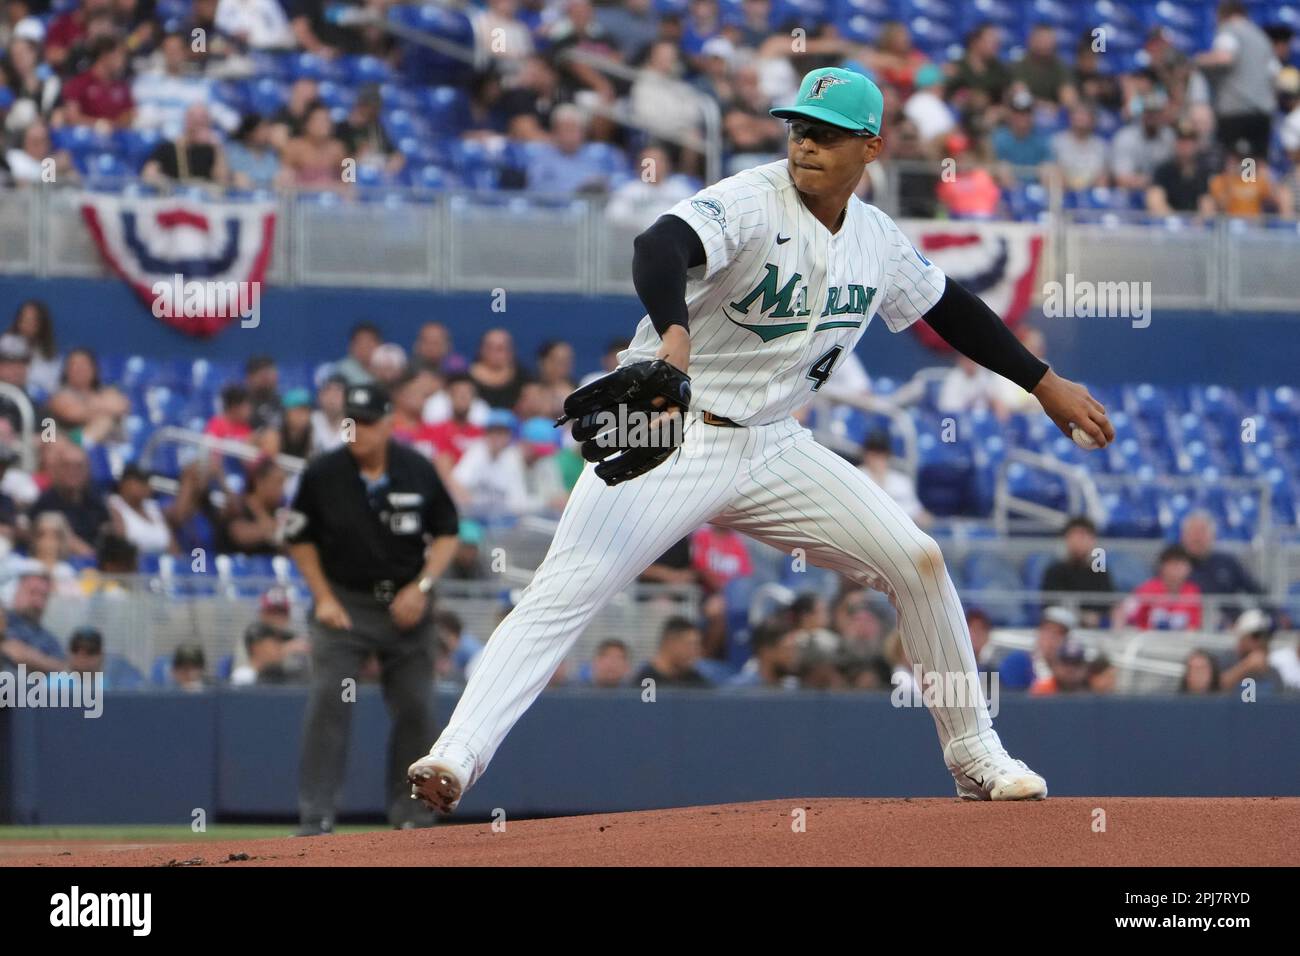 MIAMI, FL - MARCH 31: Miami Marlins starting pitcher Jesus Luzardo (44)  makes the start for the Marlins during the game between the New York Mets  and the Miami Marlins on Friday